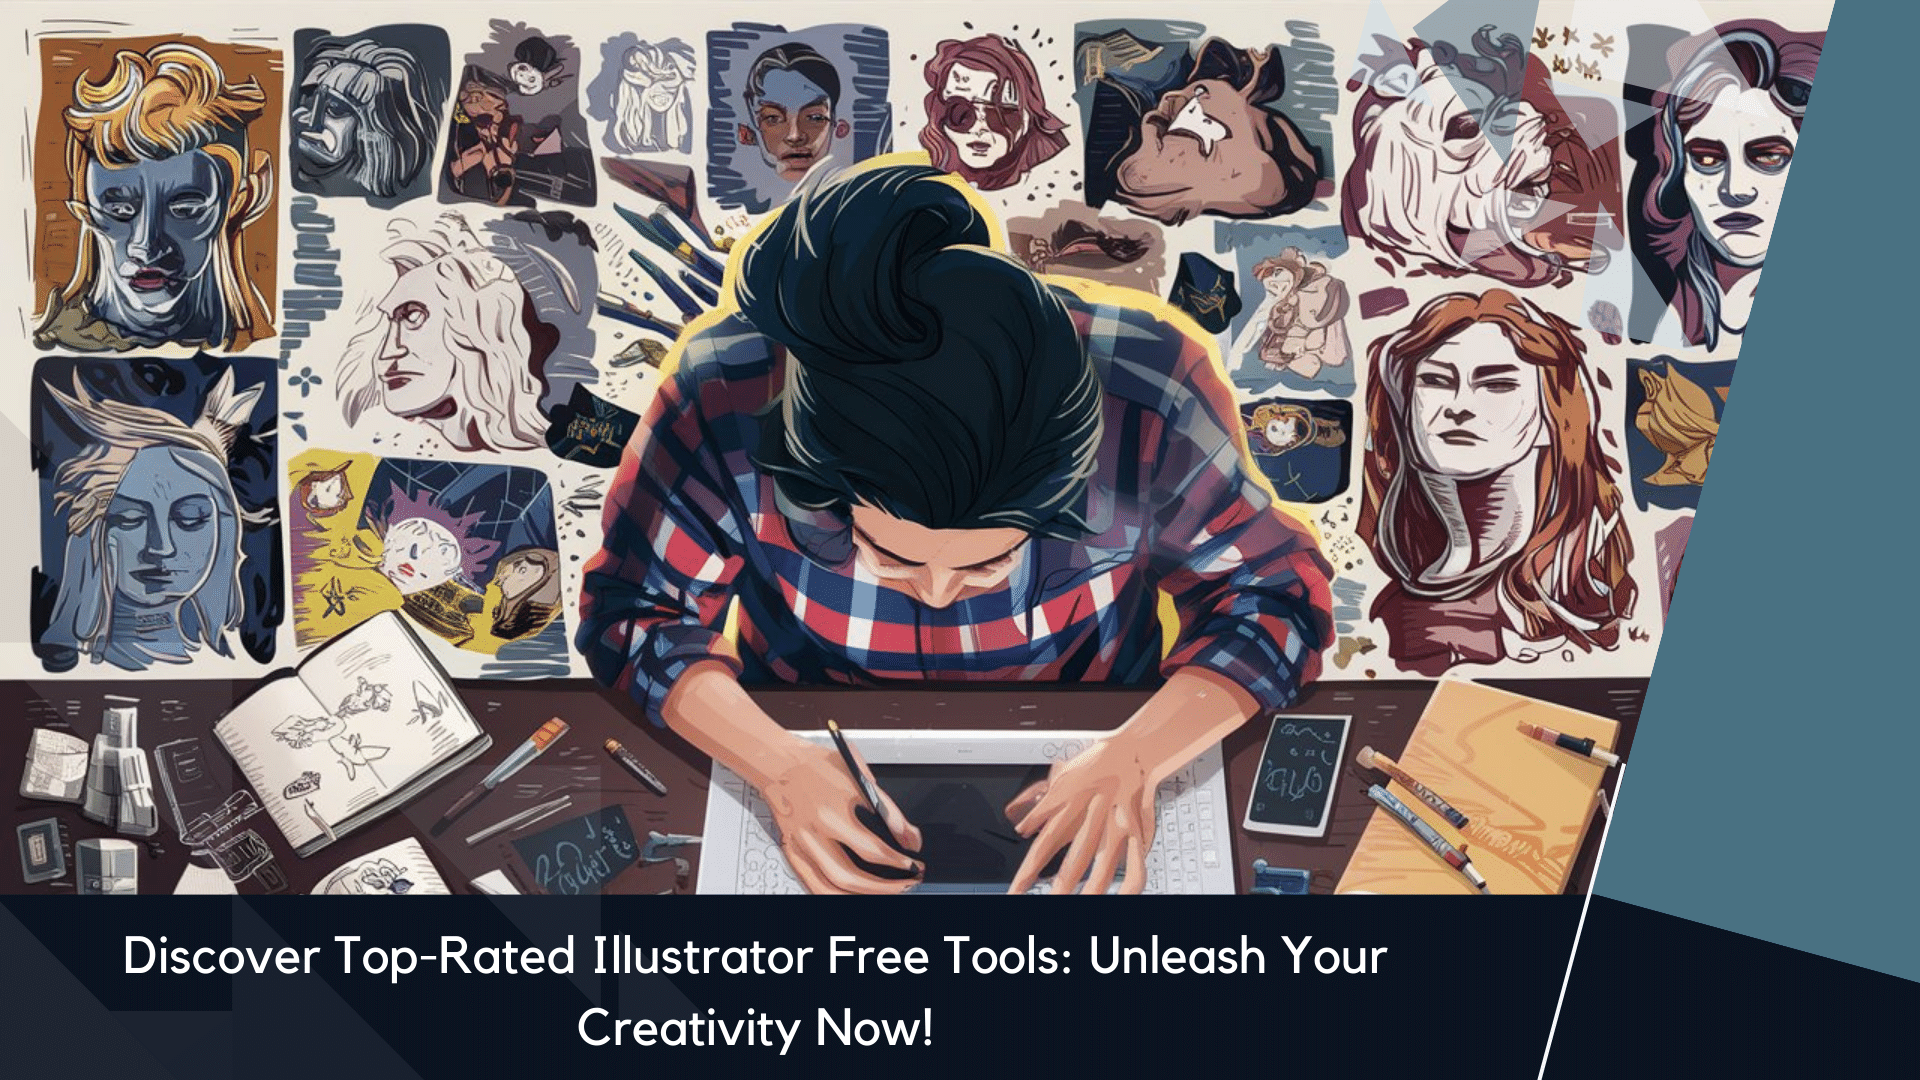 Discover Top-Rated Illustrator Free Tools Unleash Your Creativity Now!